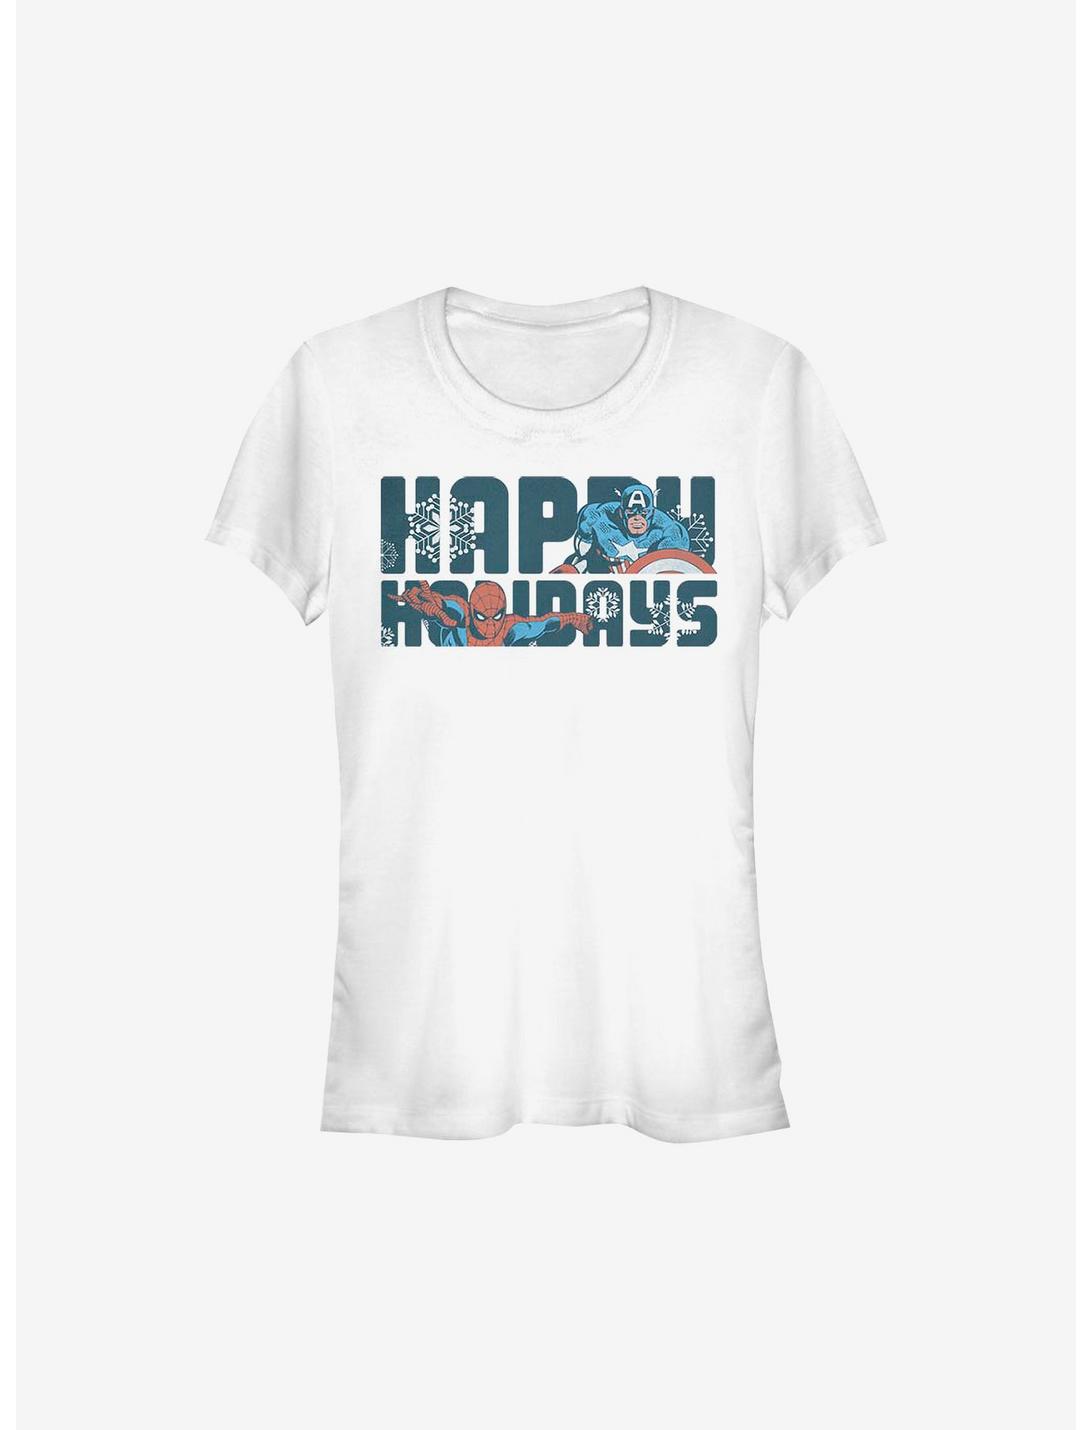 Marvel Avengers Happiest Of Holidays Girls T-Shirt, WHITE, hi-res